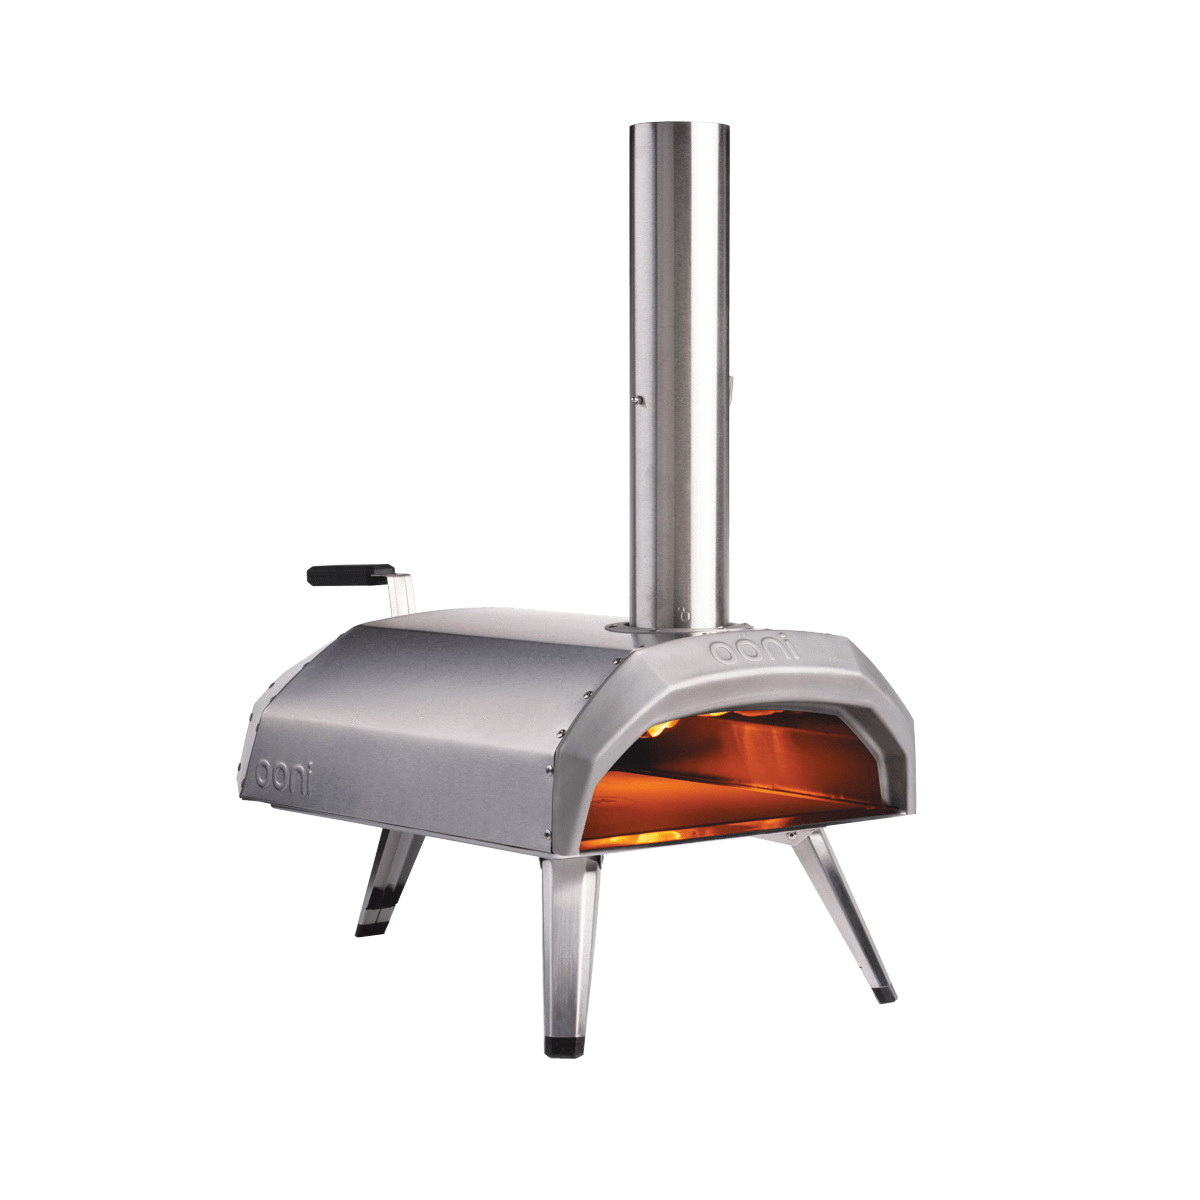 Ooni Karu 12 UU-POA100 Multi-Fuel Pizza Oven, 15.7 in W, 26.6 in D, 28.7 in H, Glass Reinforced Nylon/Stainless Steel - 1